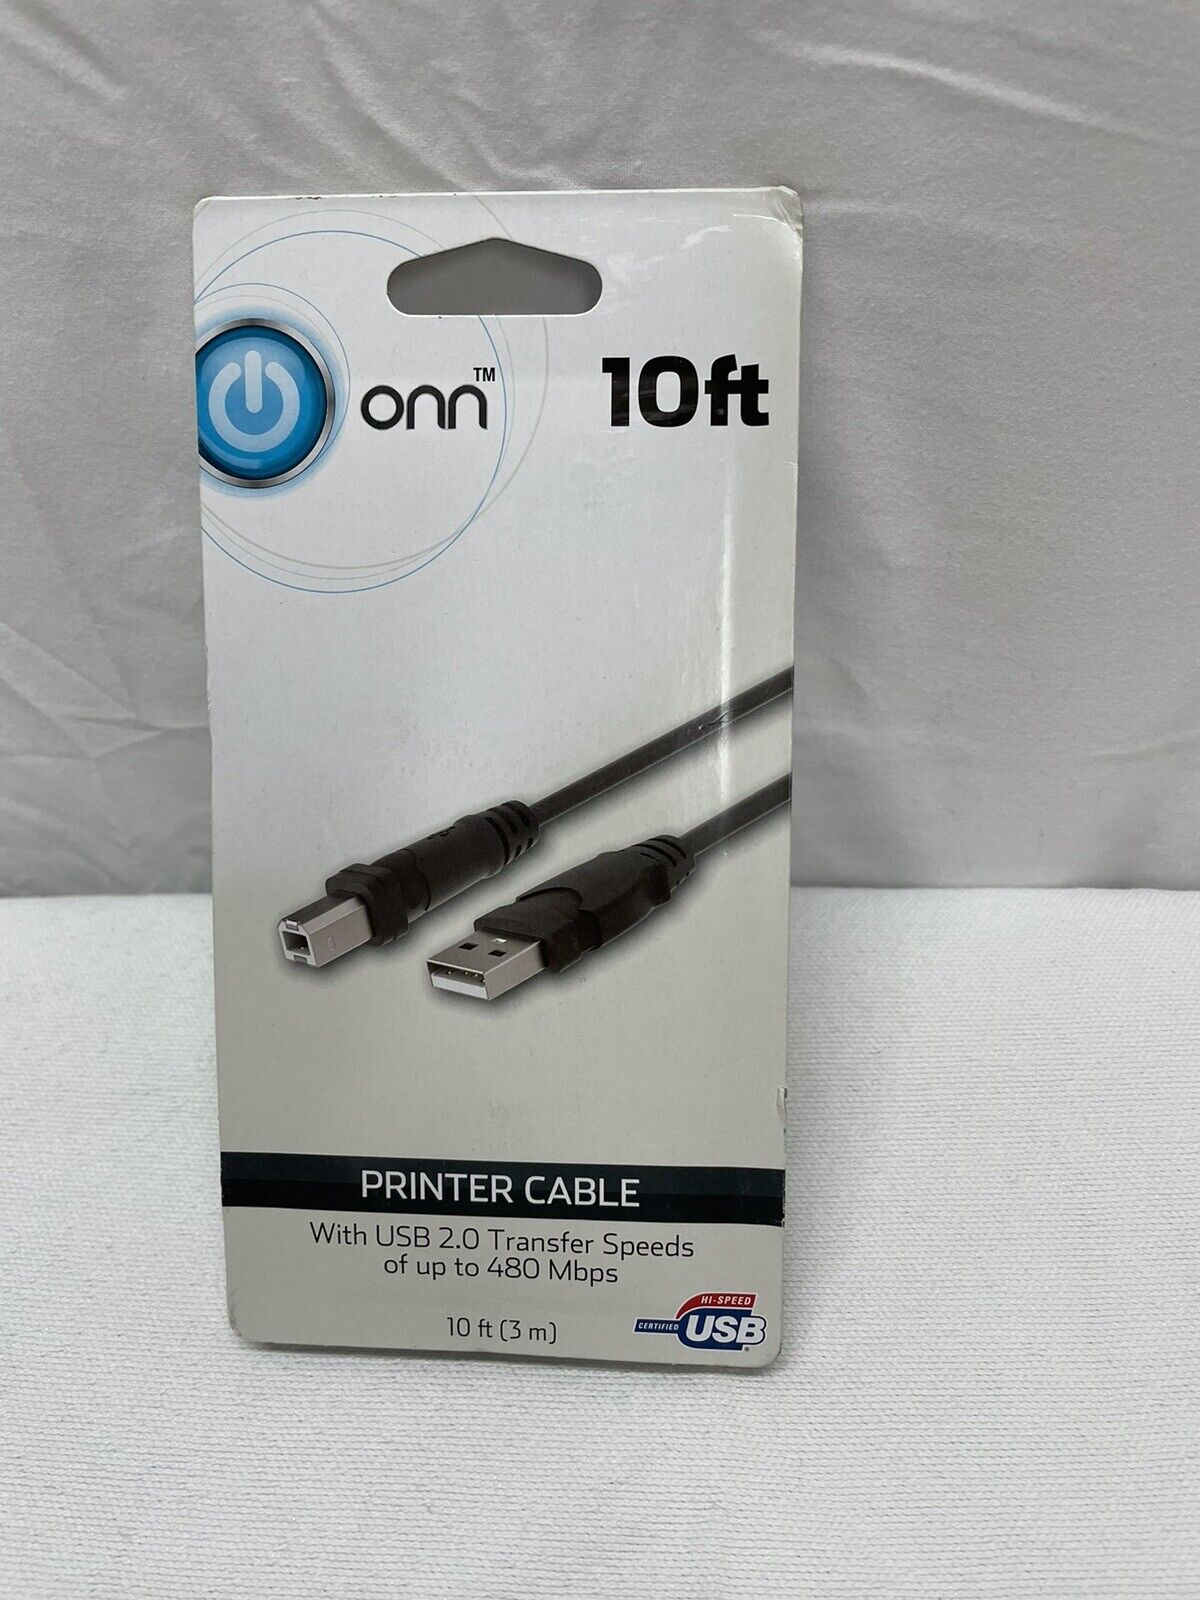 Onn 10. ft printer cable new in packaging 